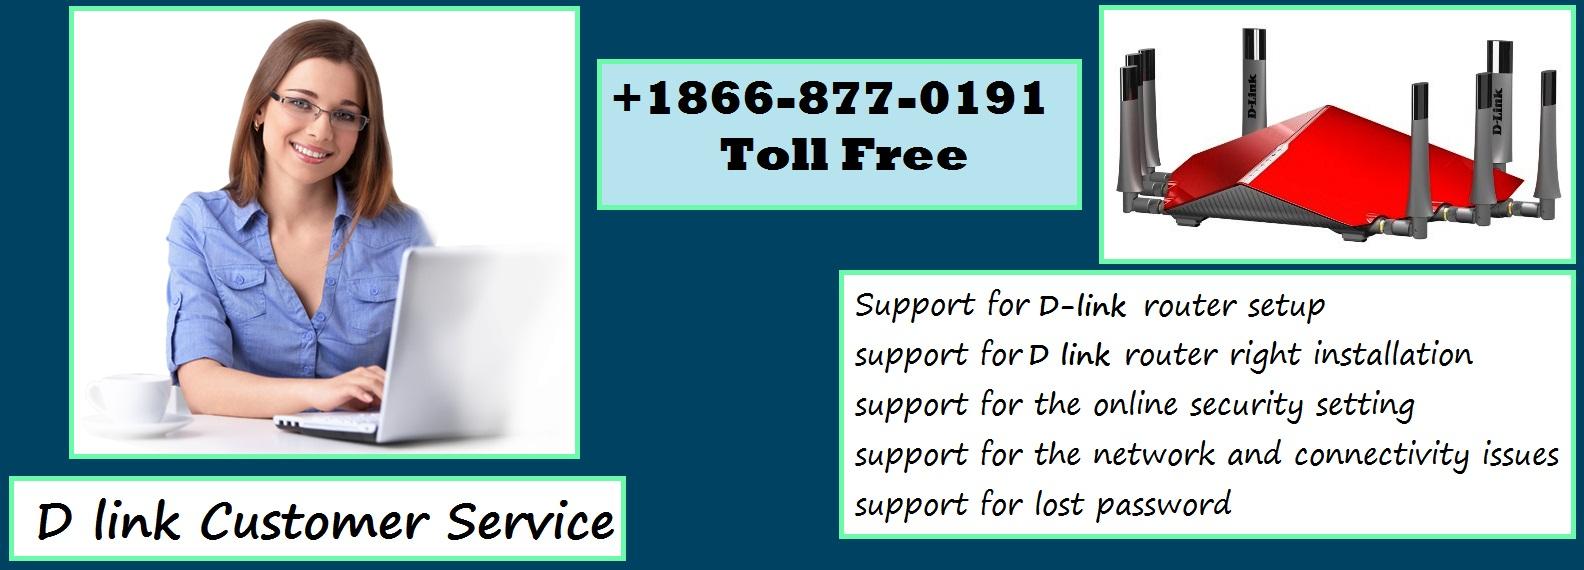 D-link Customer Service by Router help support